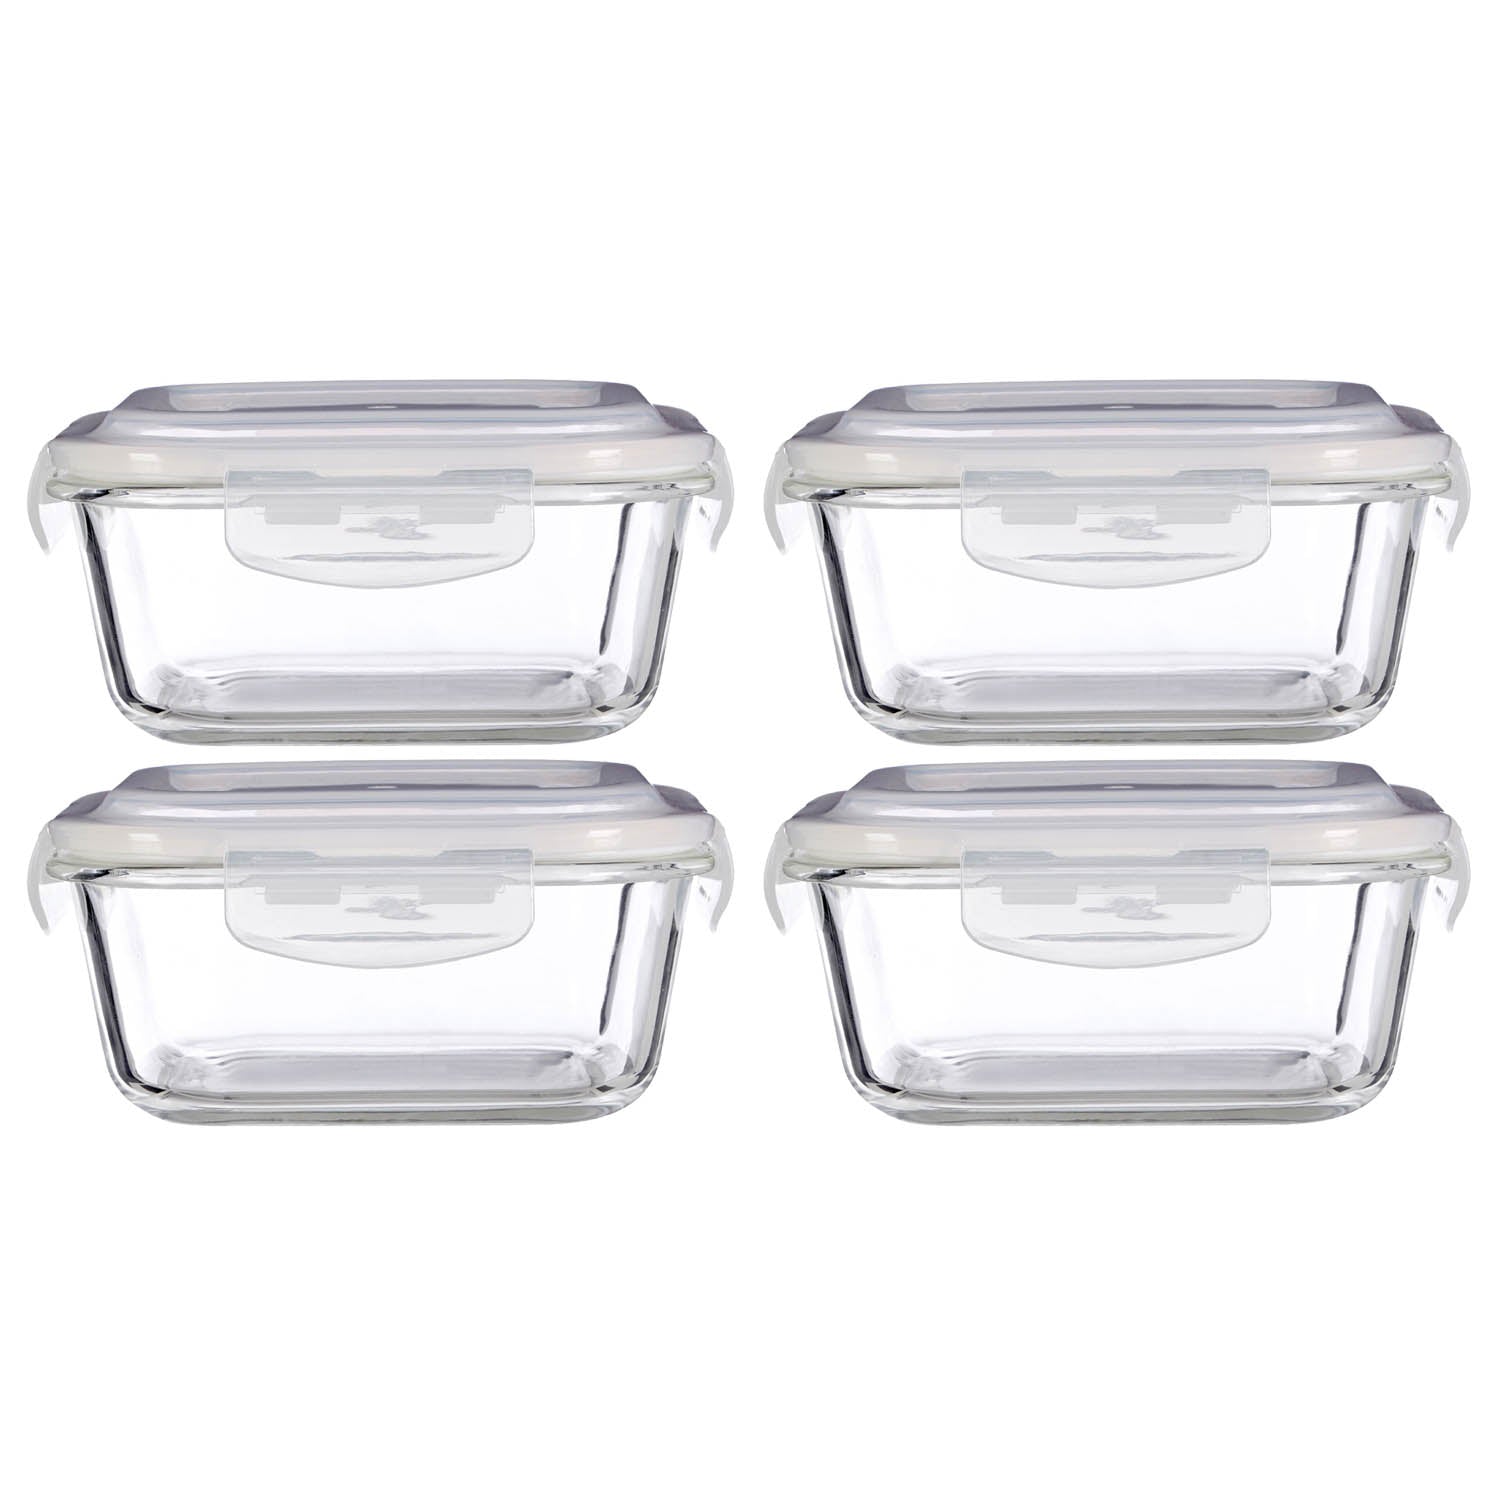 Set of 4 Freska 800ml Glass Food Container